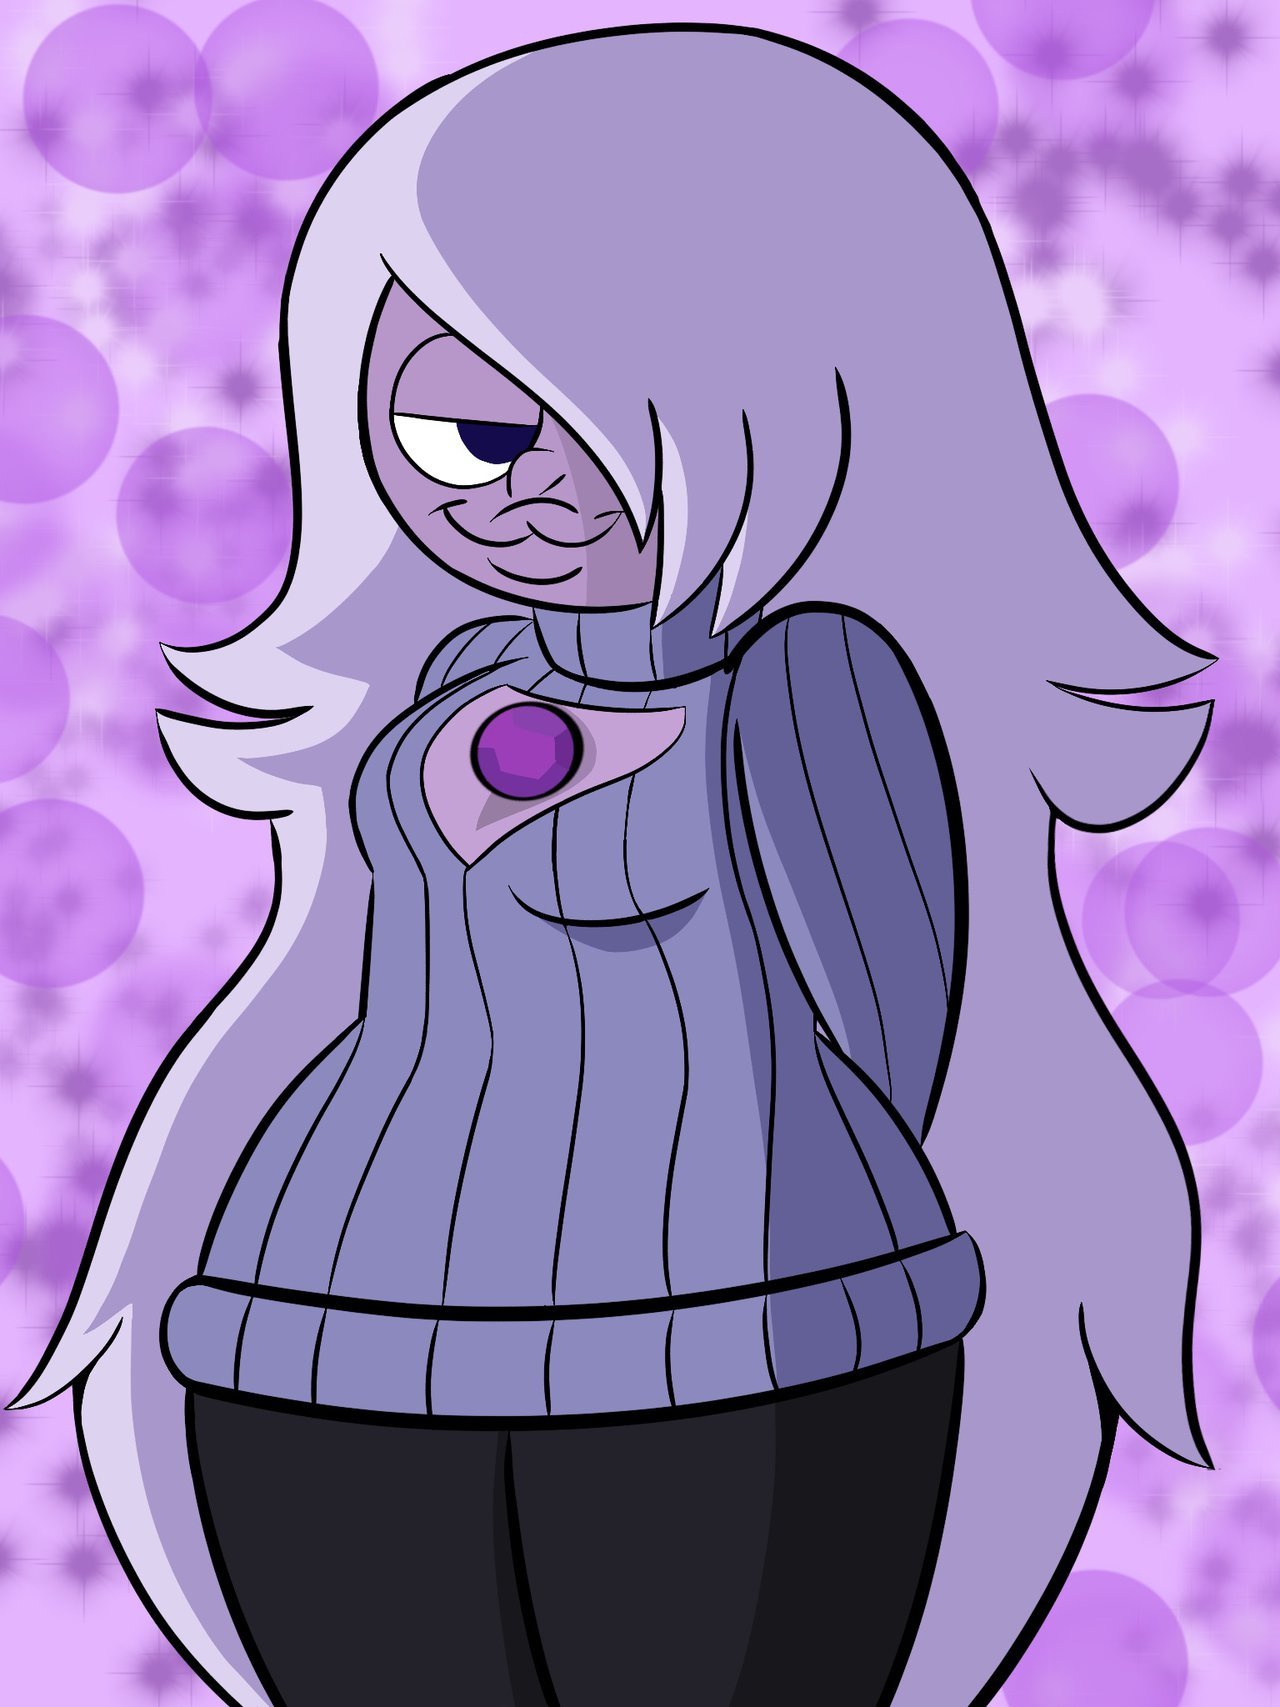 codykins123:  Amethyst in Turtleneck Sweater by Codykins123 To all of my haters flipping